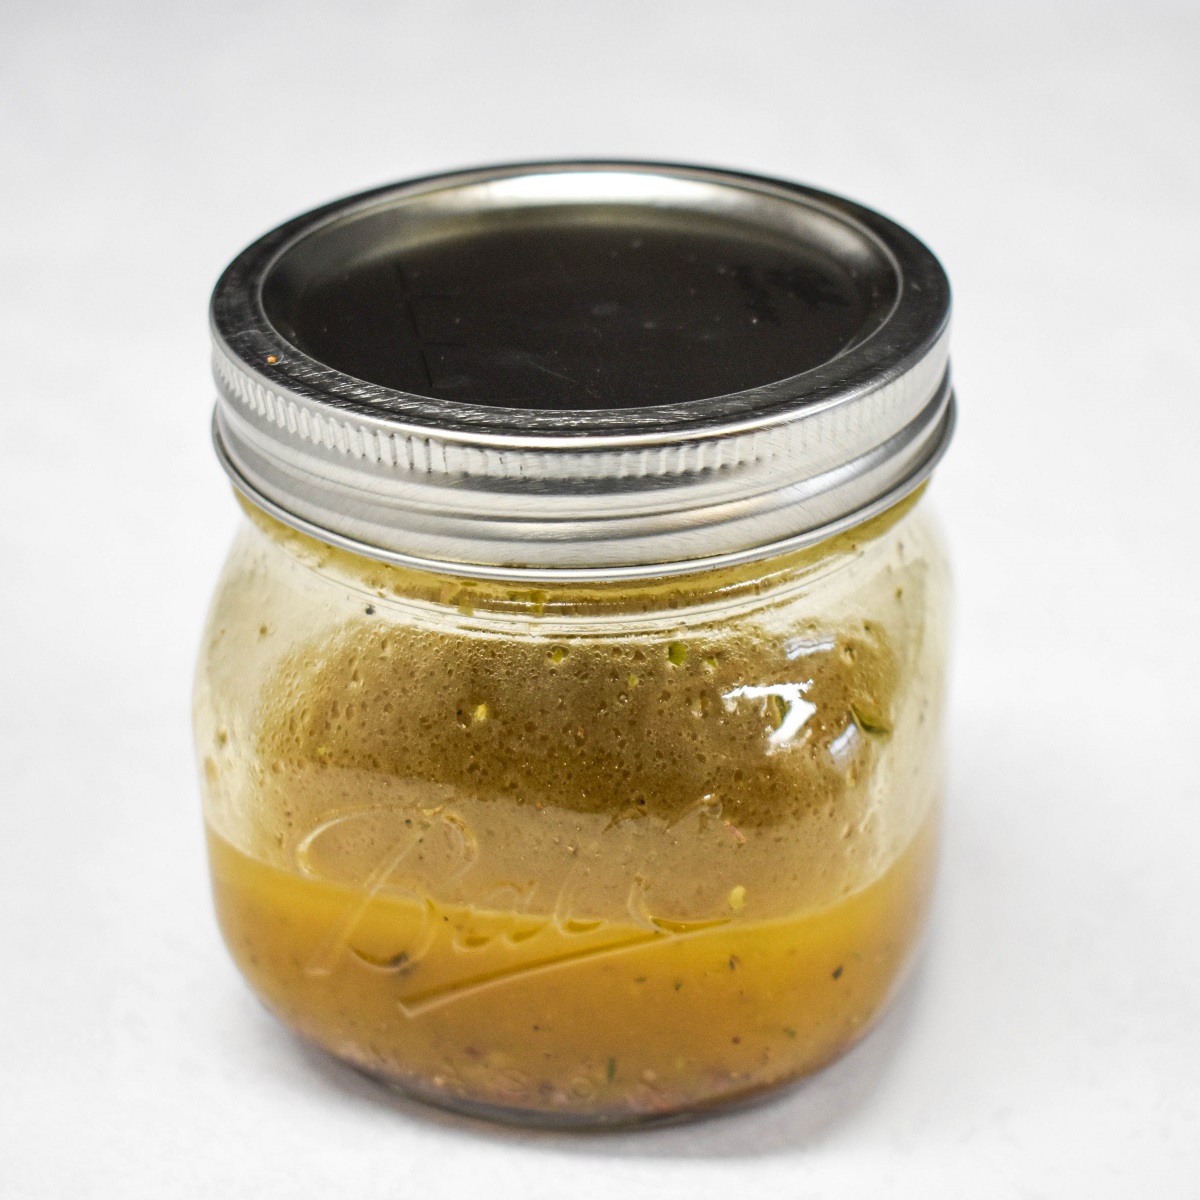 Homemade Italian dressing in a small canning jar, set on a white table.